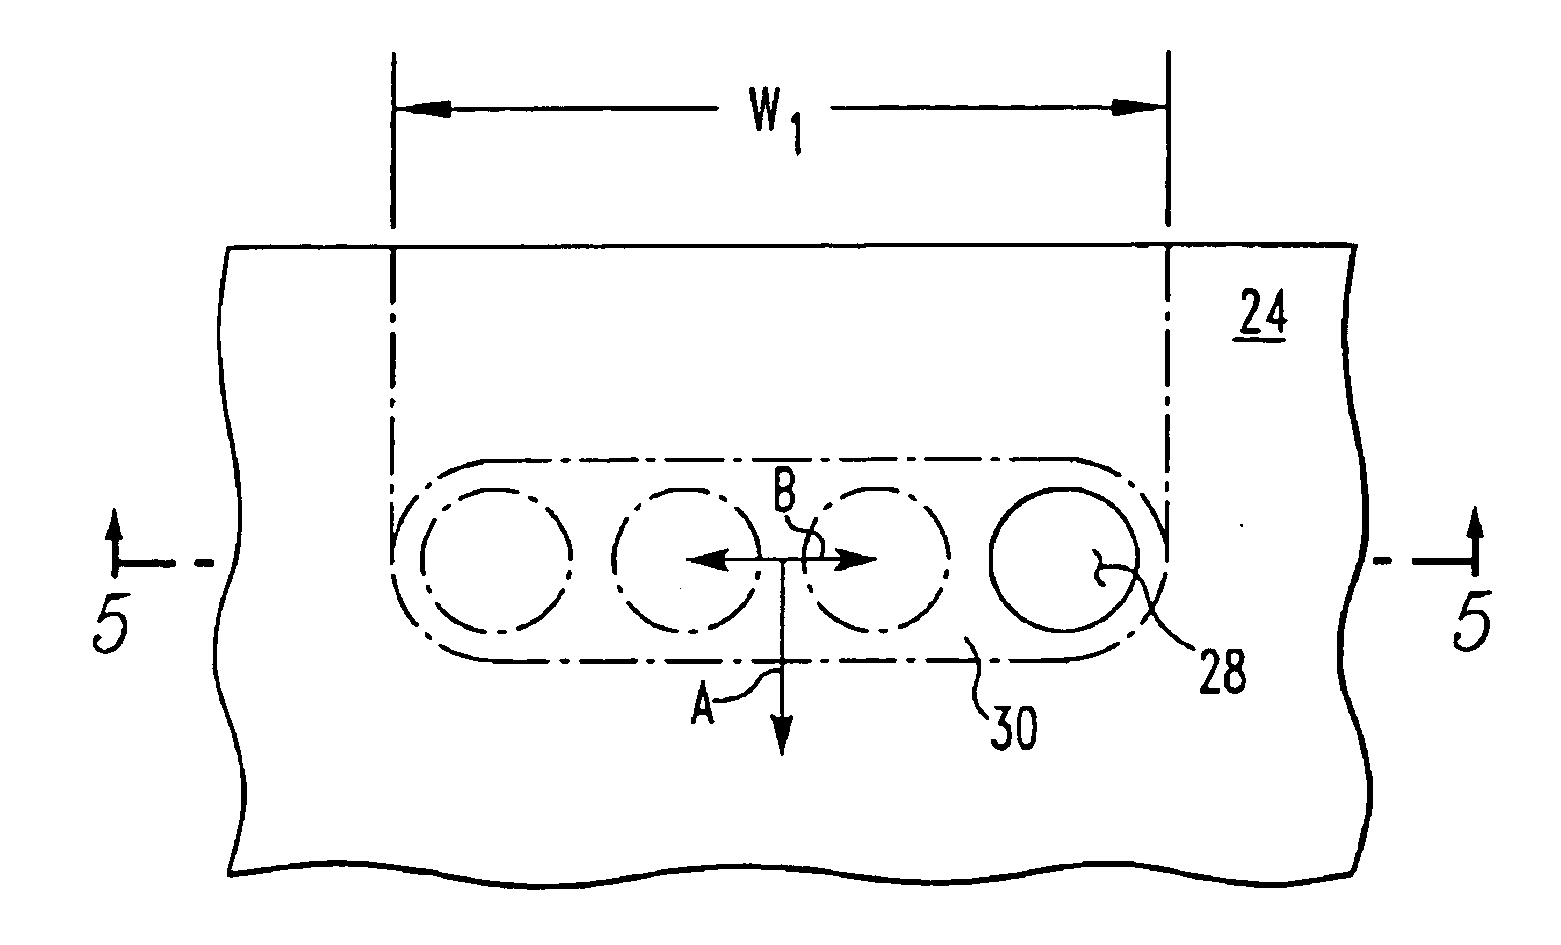 Apparatus and methods for conducting laser stir welding